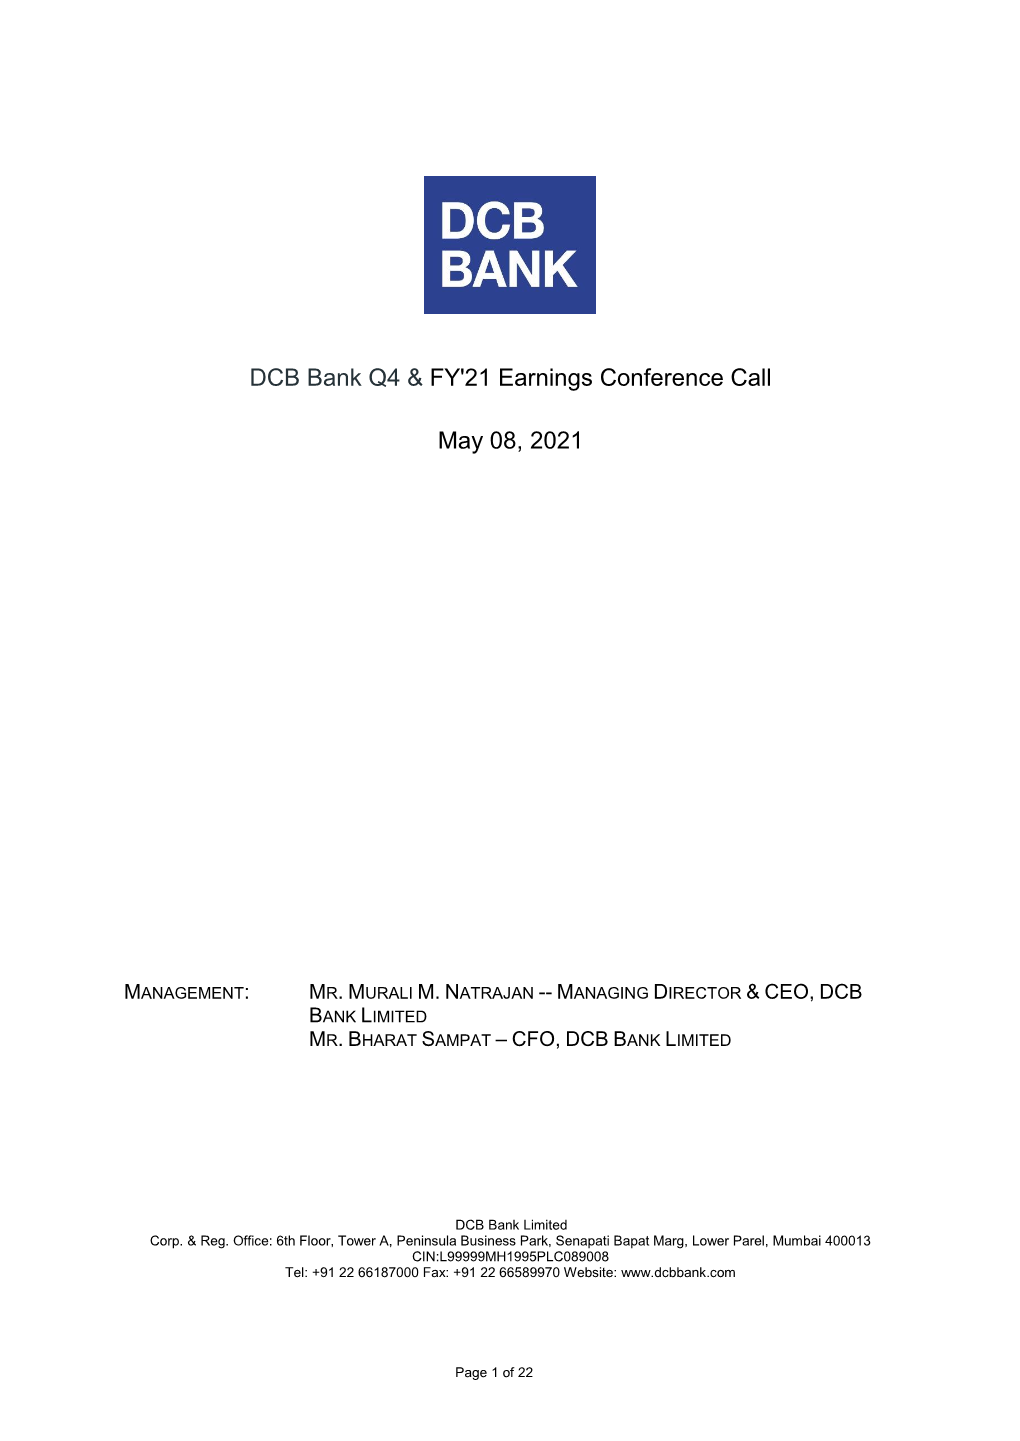 DCB Bank Q4 & FY'21 Earnings Conference Call May 08, 2021